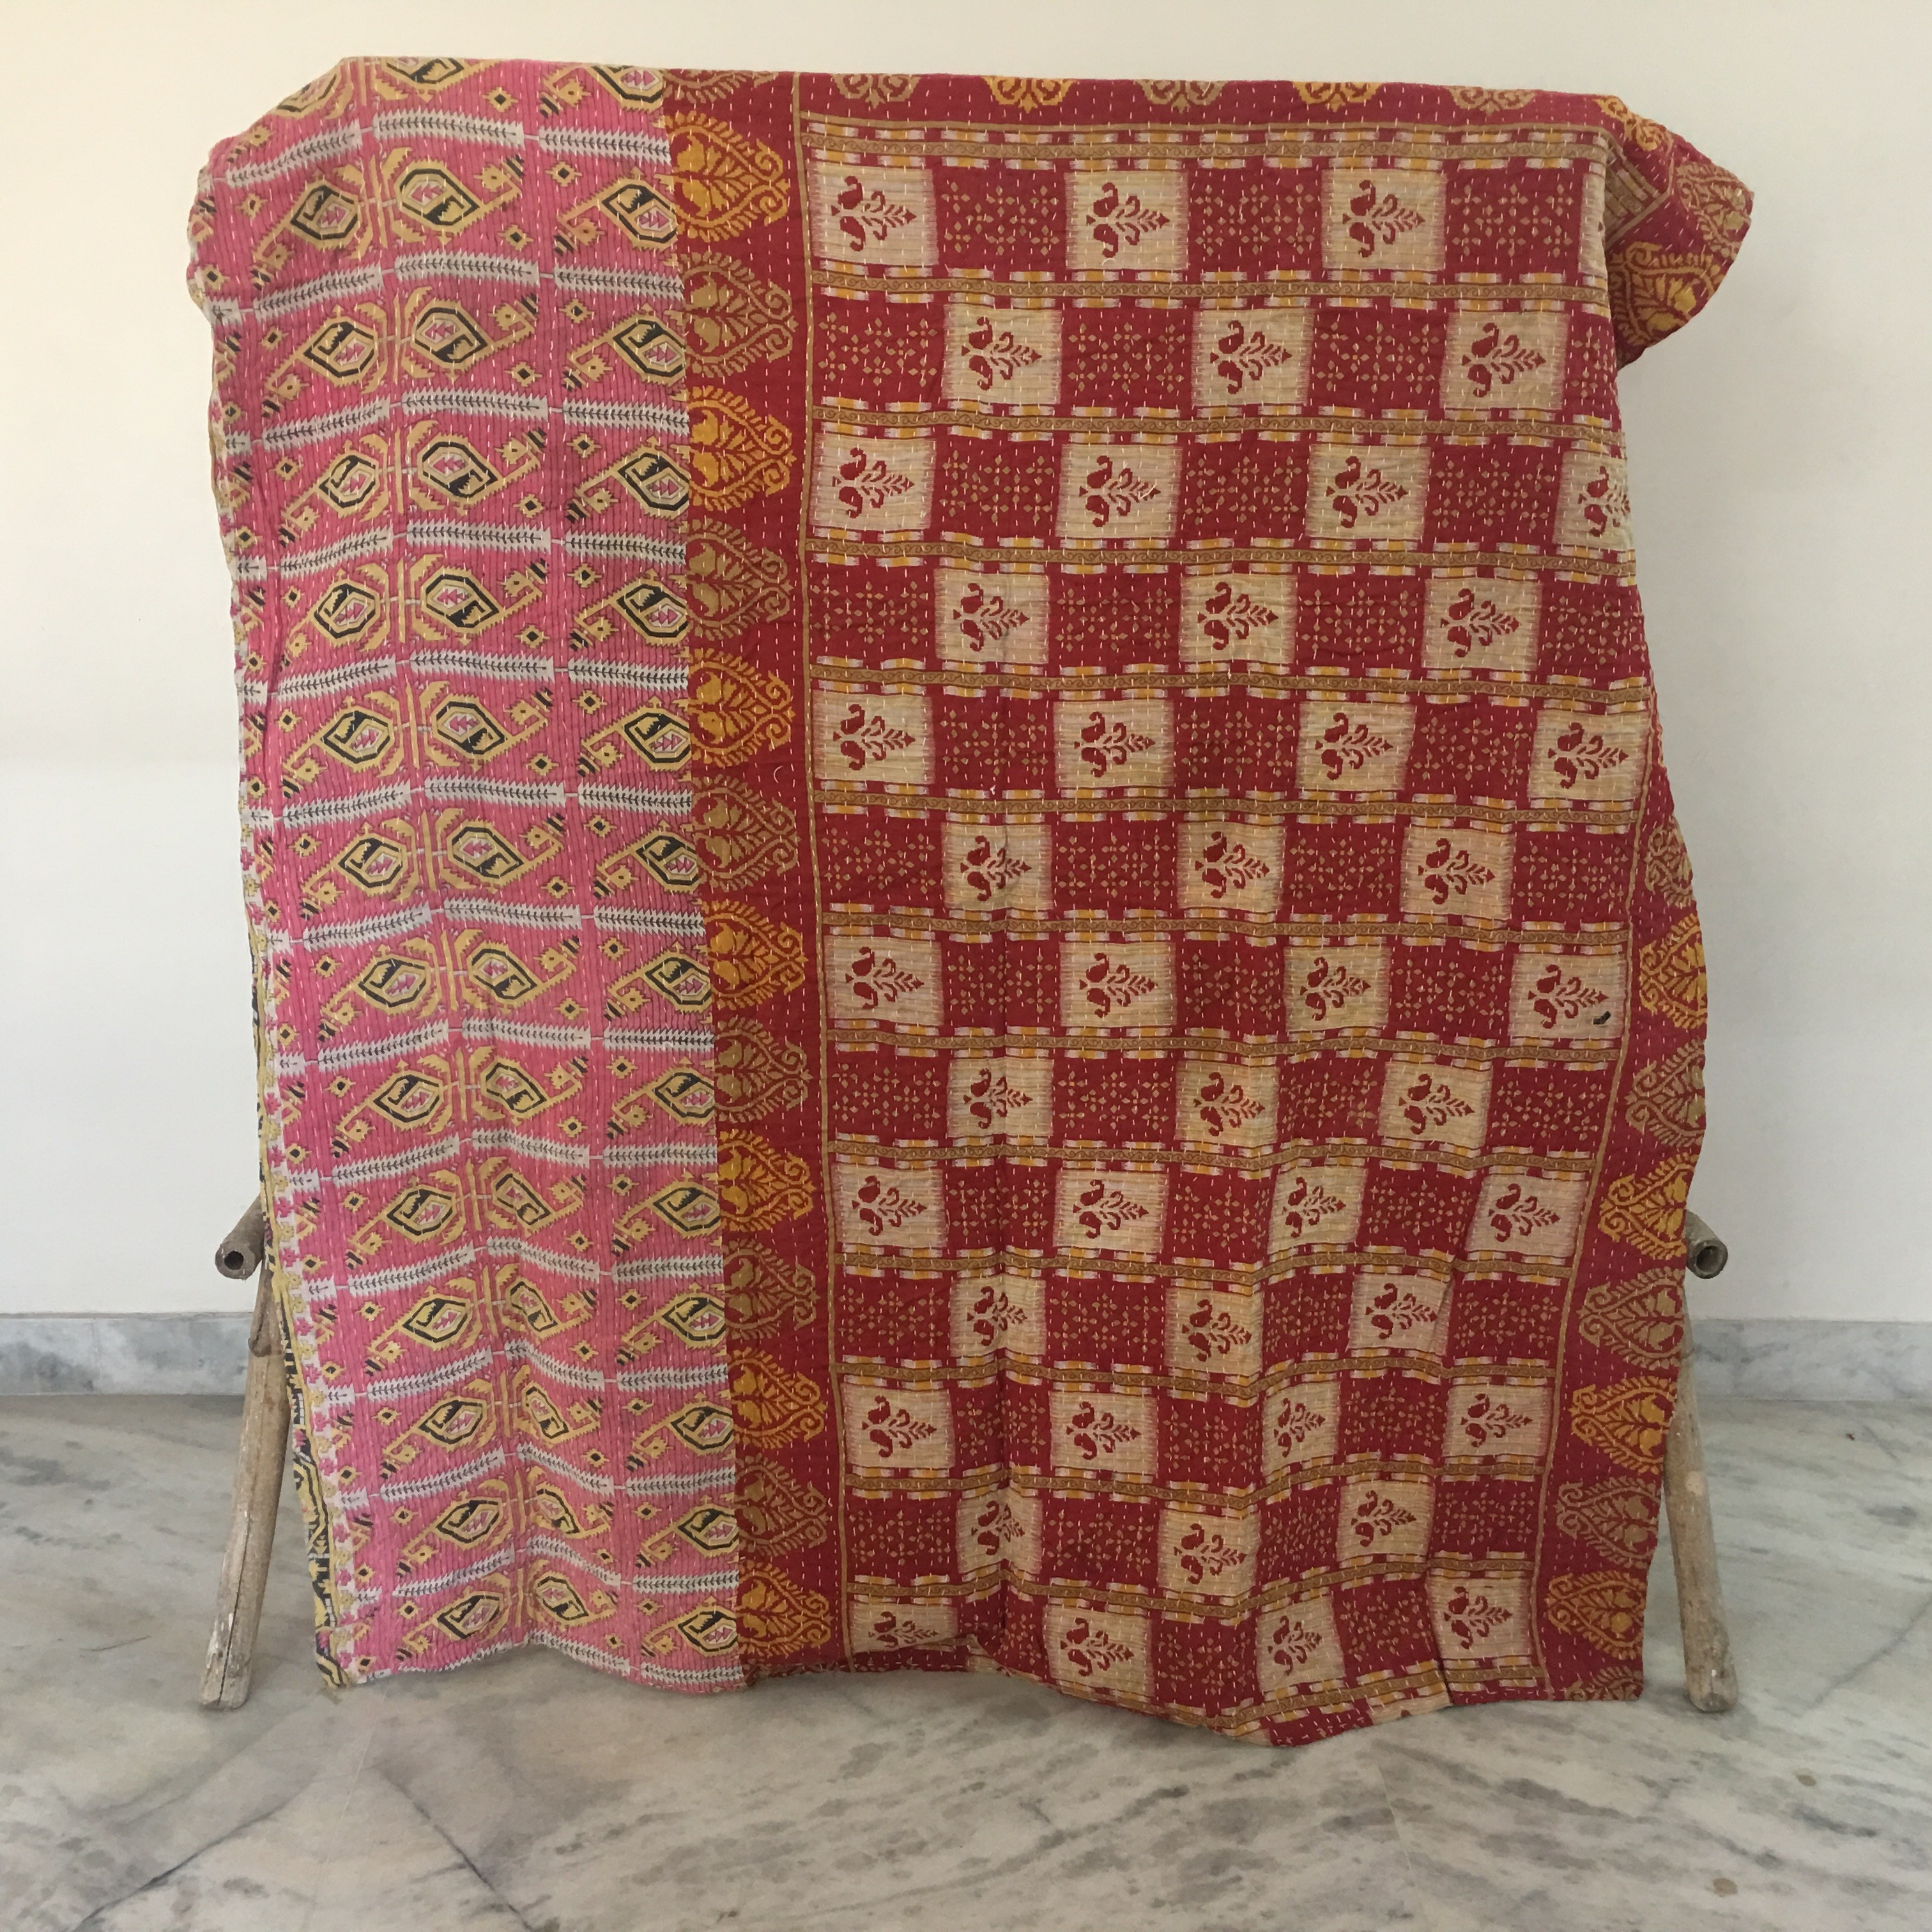 Vintage Kantha quilt Quality Hand Stitching Reversible Wholesale Lot Cotton Kantha Quilt /Blanket / Throw / Bohemian / Bedspread